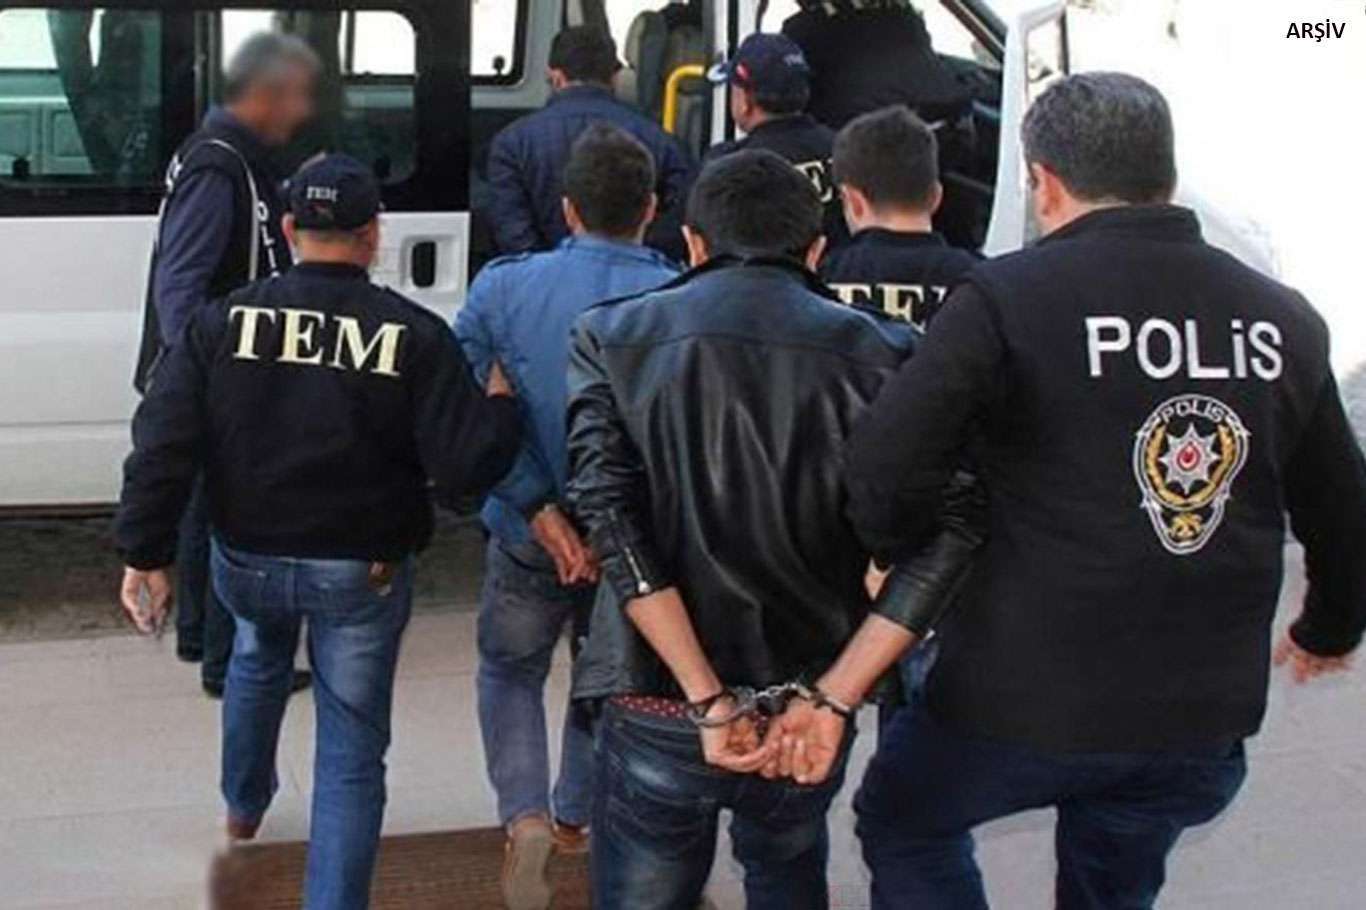 66 FETO-linked suspects arrested in Izmir-based operation